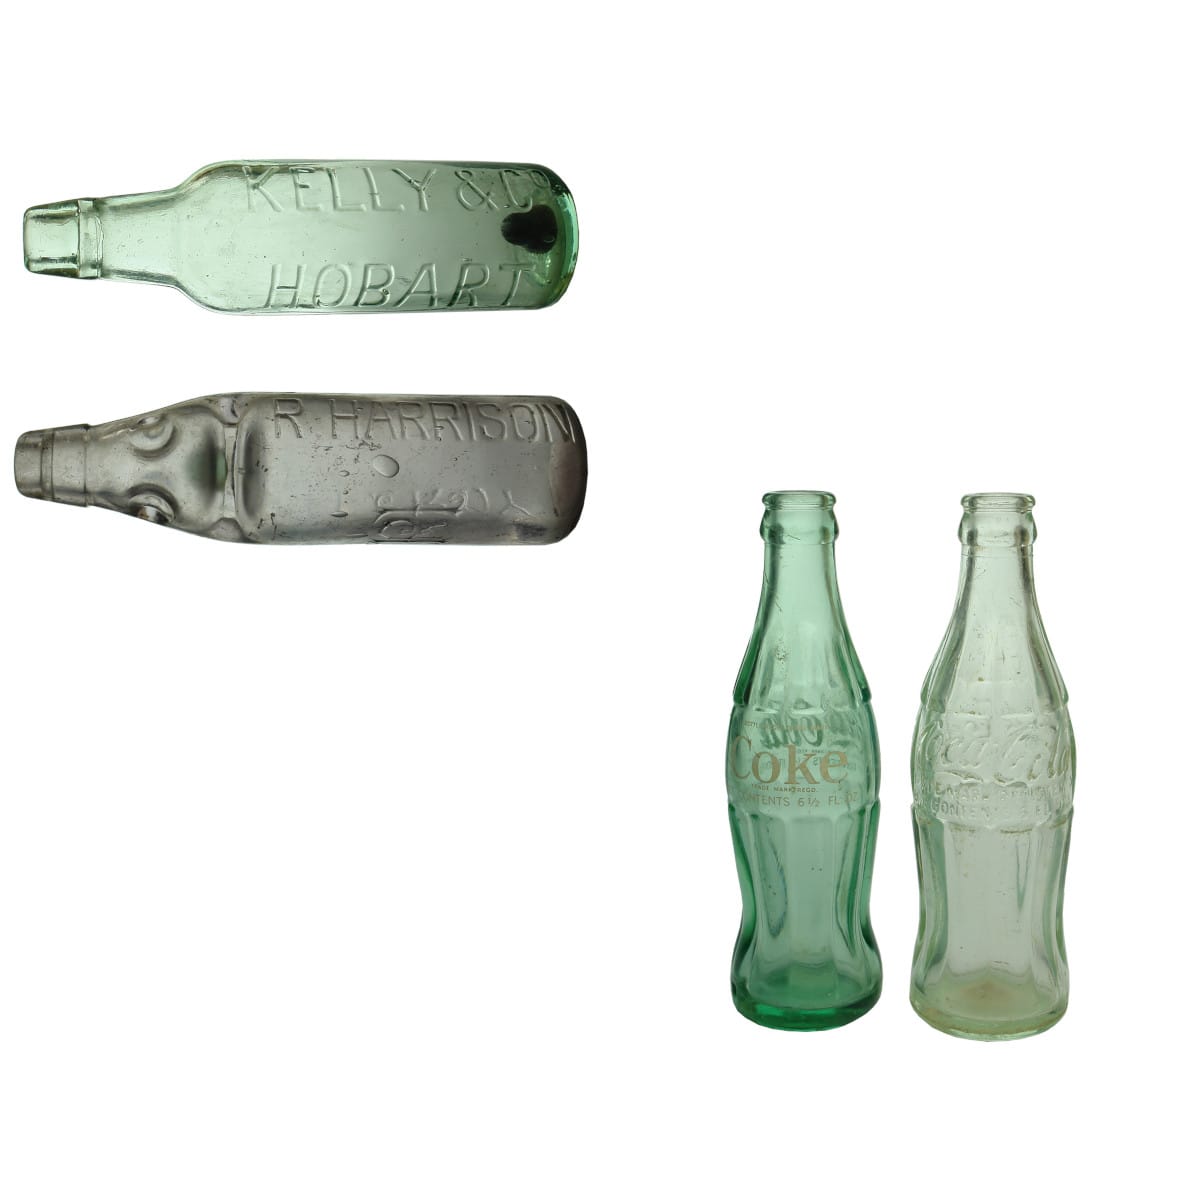 4 Aerated Water Bottles: Harrison, Fitzroy Codd; Kelly & Co., Hobart Lamont; 2 x Coke Coca Cola Crown Seals.